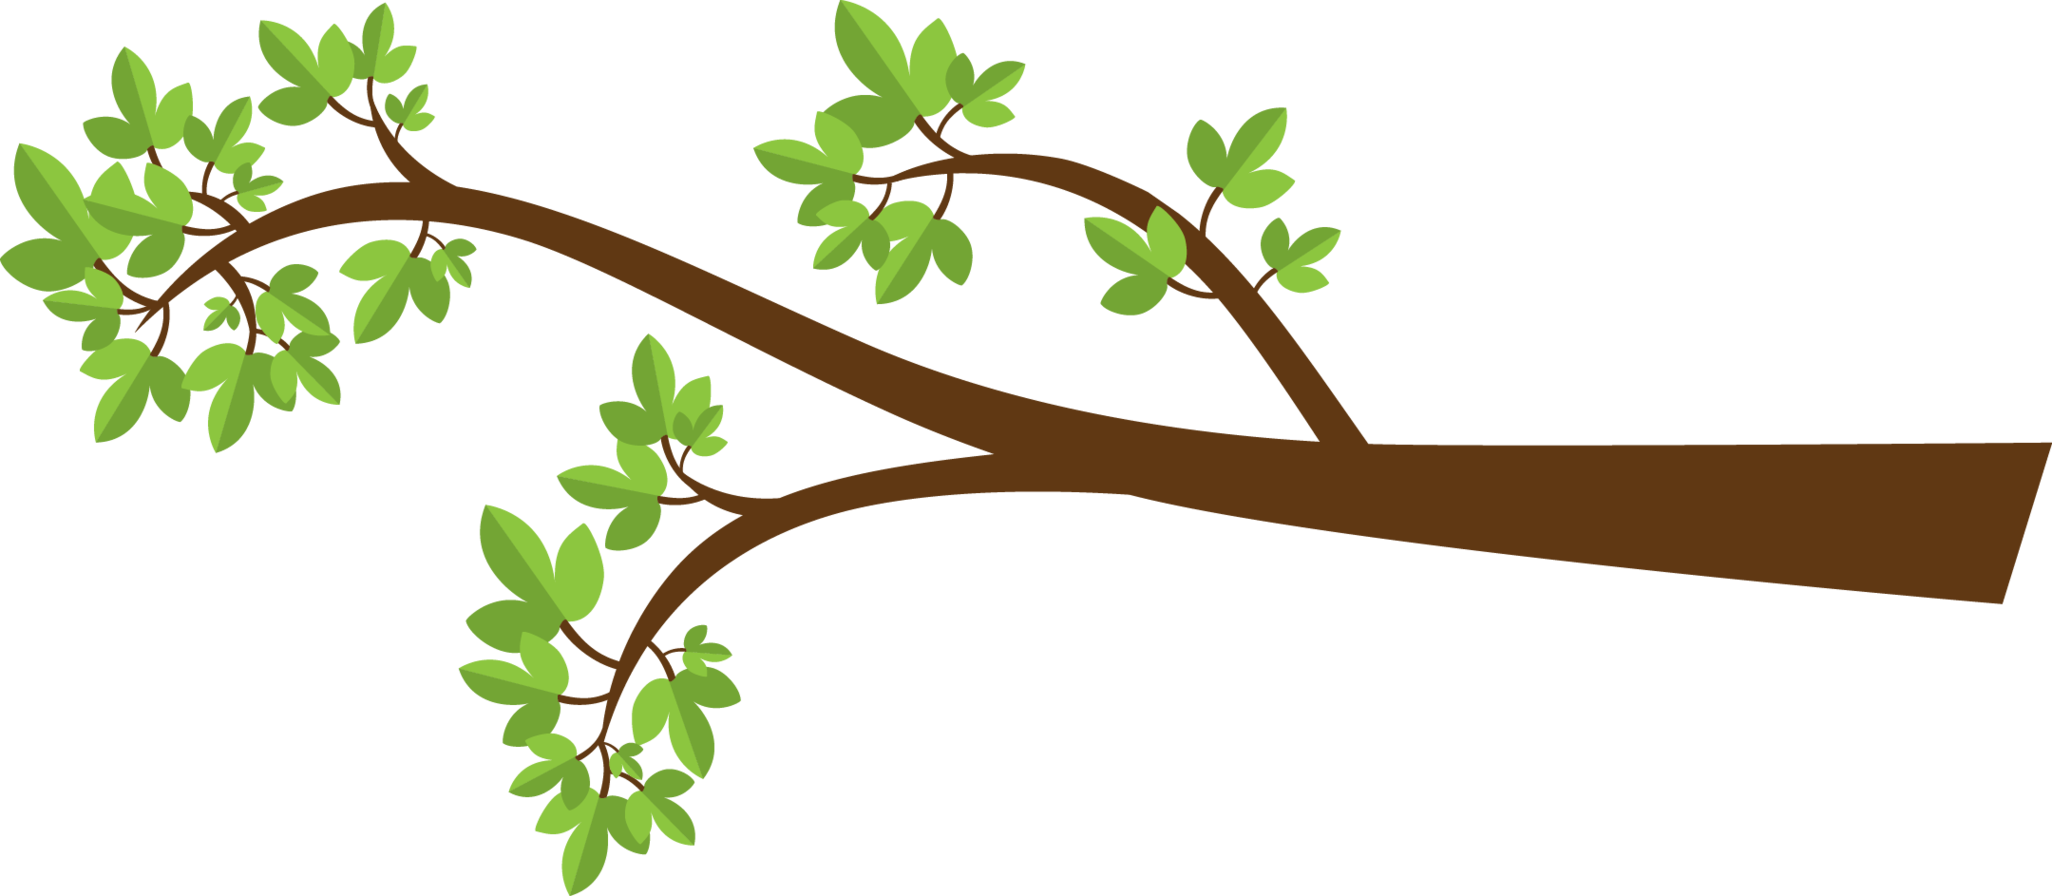 Tree Branches Clip Art. Tree  - Tree Branch Clipart